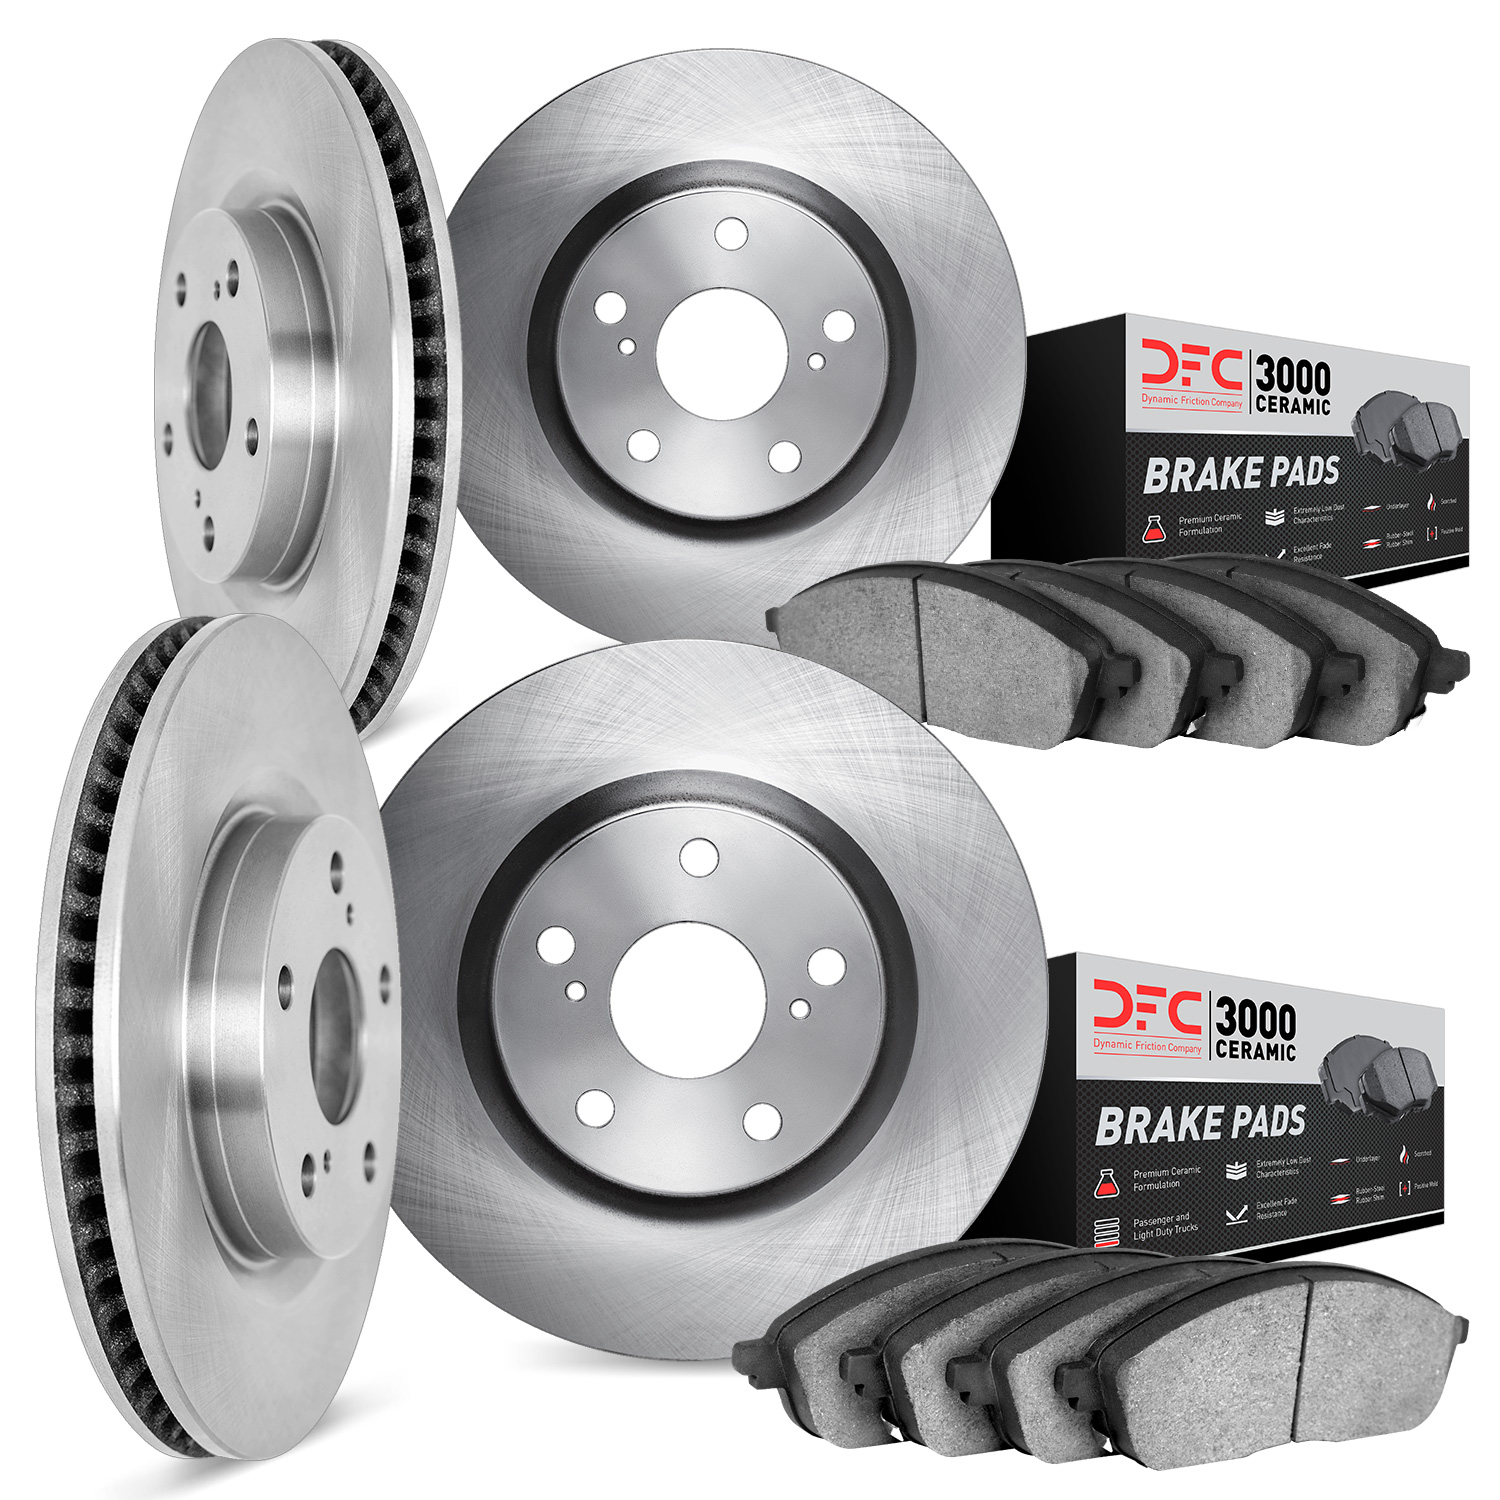 6304-31089 Brake Rotors with 3000-Series Ceramic Brake Pads Kit, 2012-2016 BMW, Position: Front and Rear